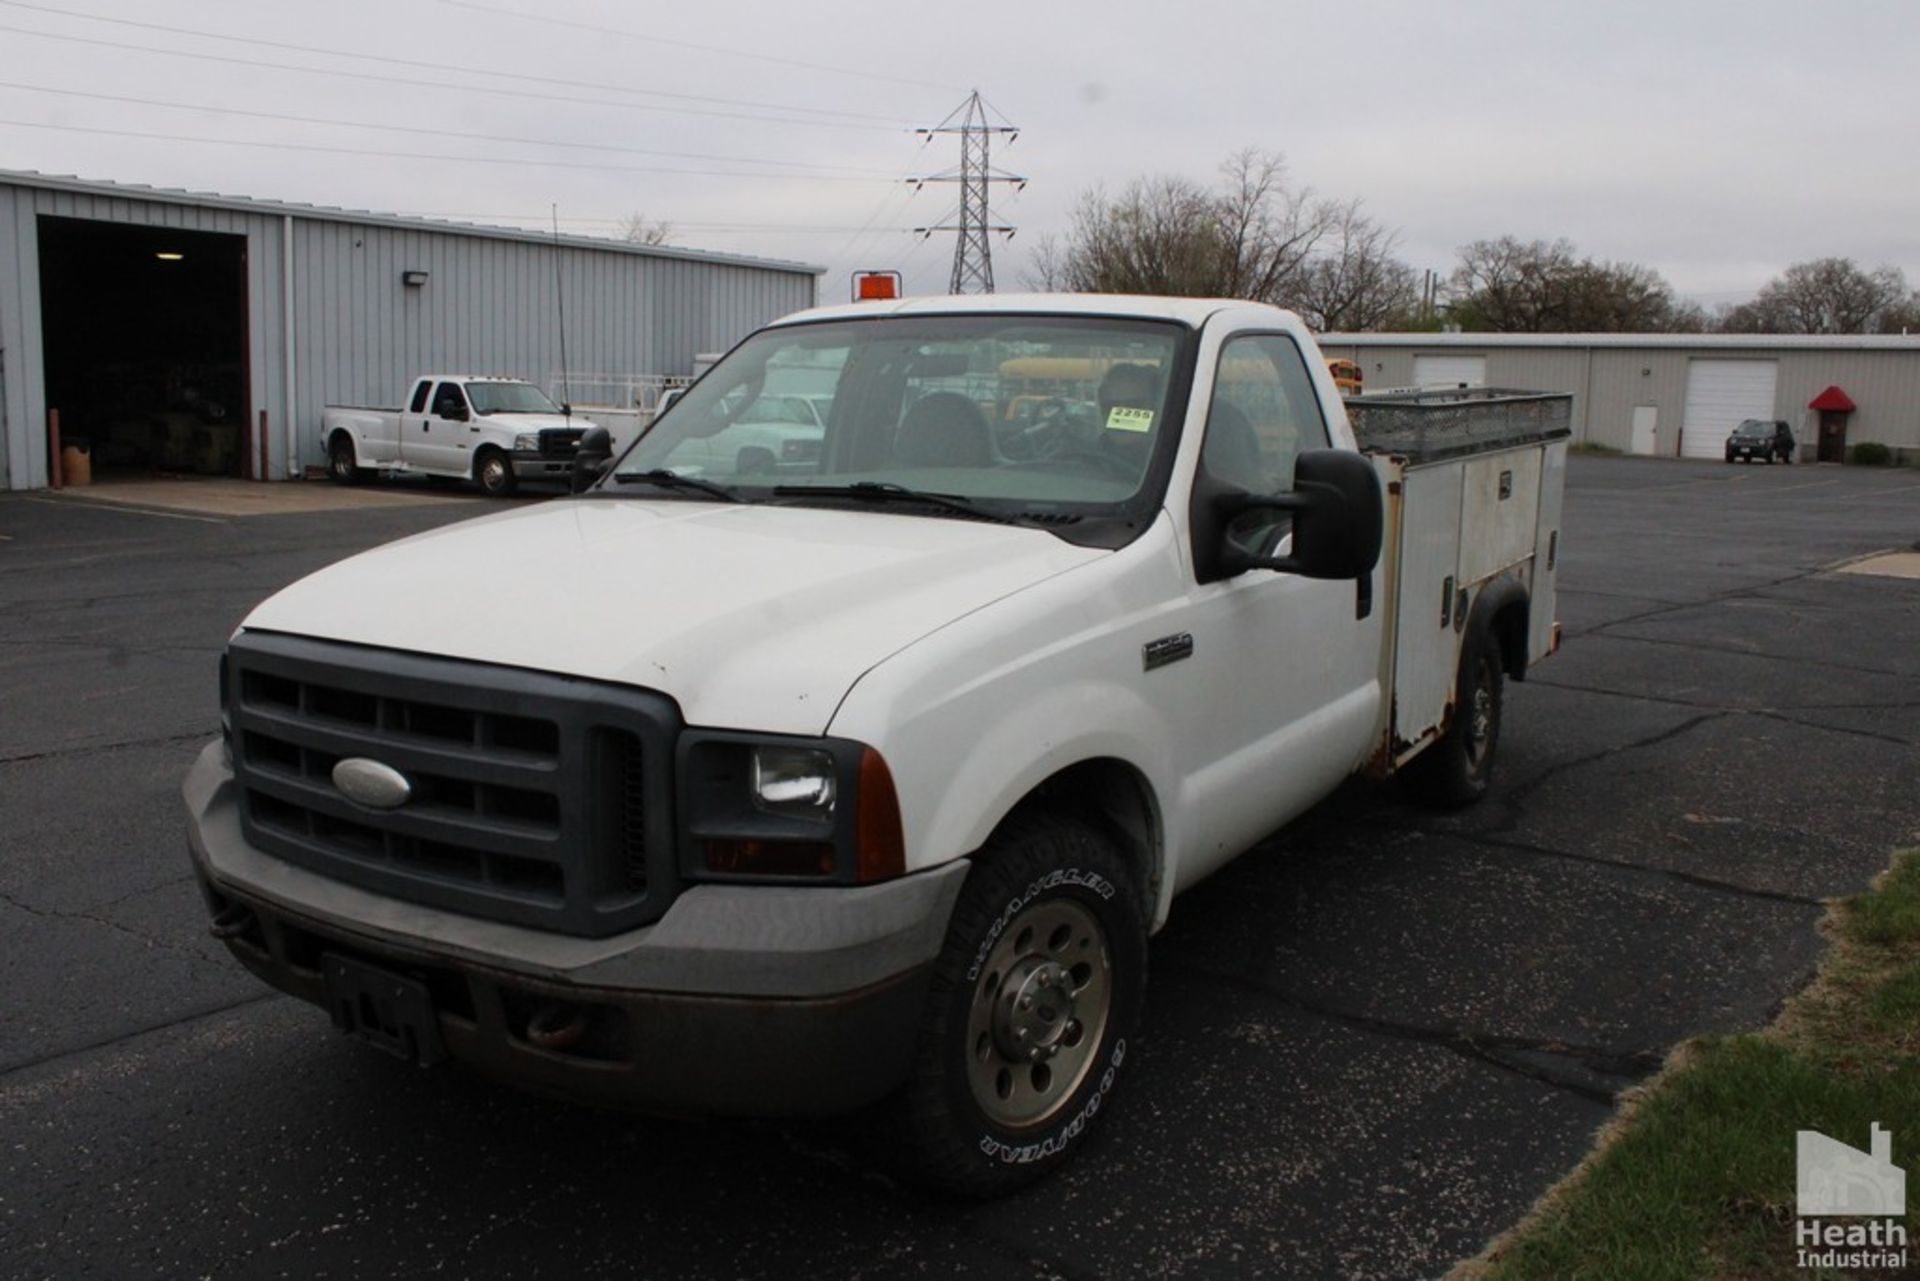 FORD F250 XL SUPER DUTY PICK UP TRUCK | CONTRACTOR STYLE BODY | DIESEL FUEL TANK WITH PUMP | - Image 9 of 9